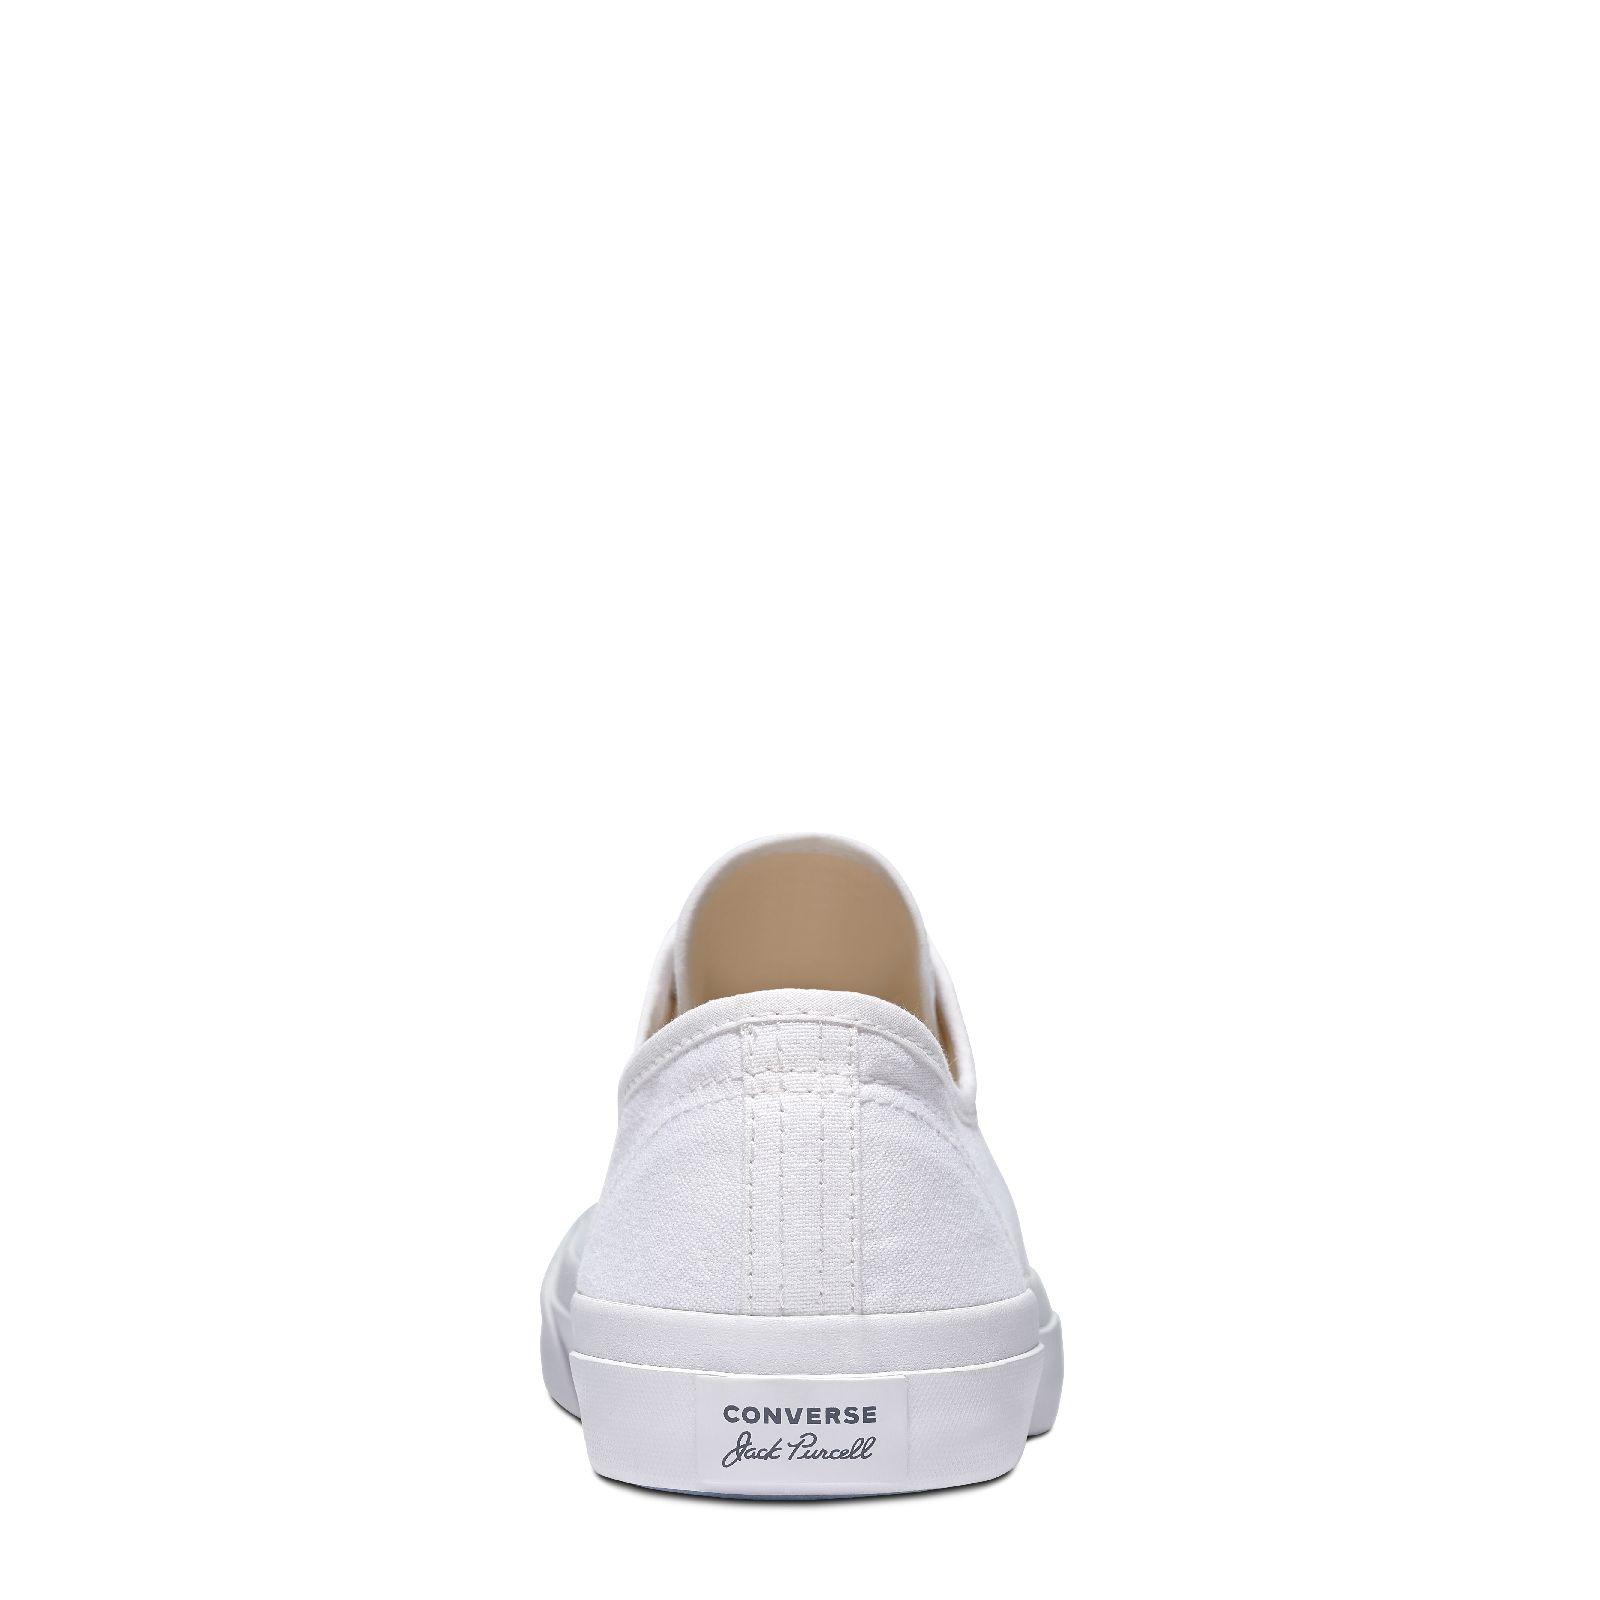 Converse Jack Purcell Jack - Ox - White 